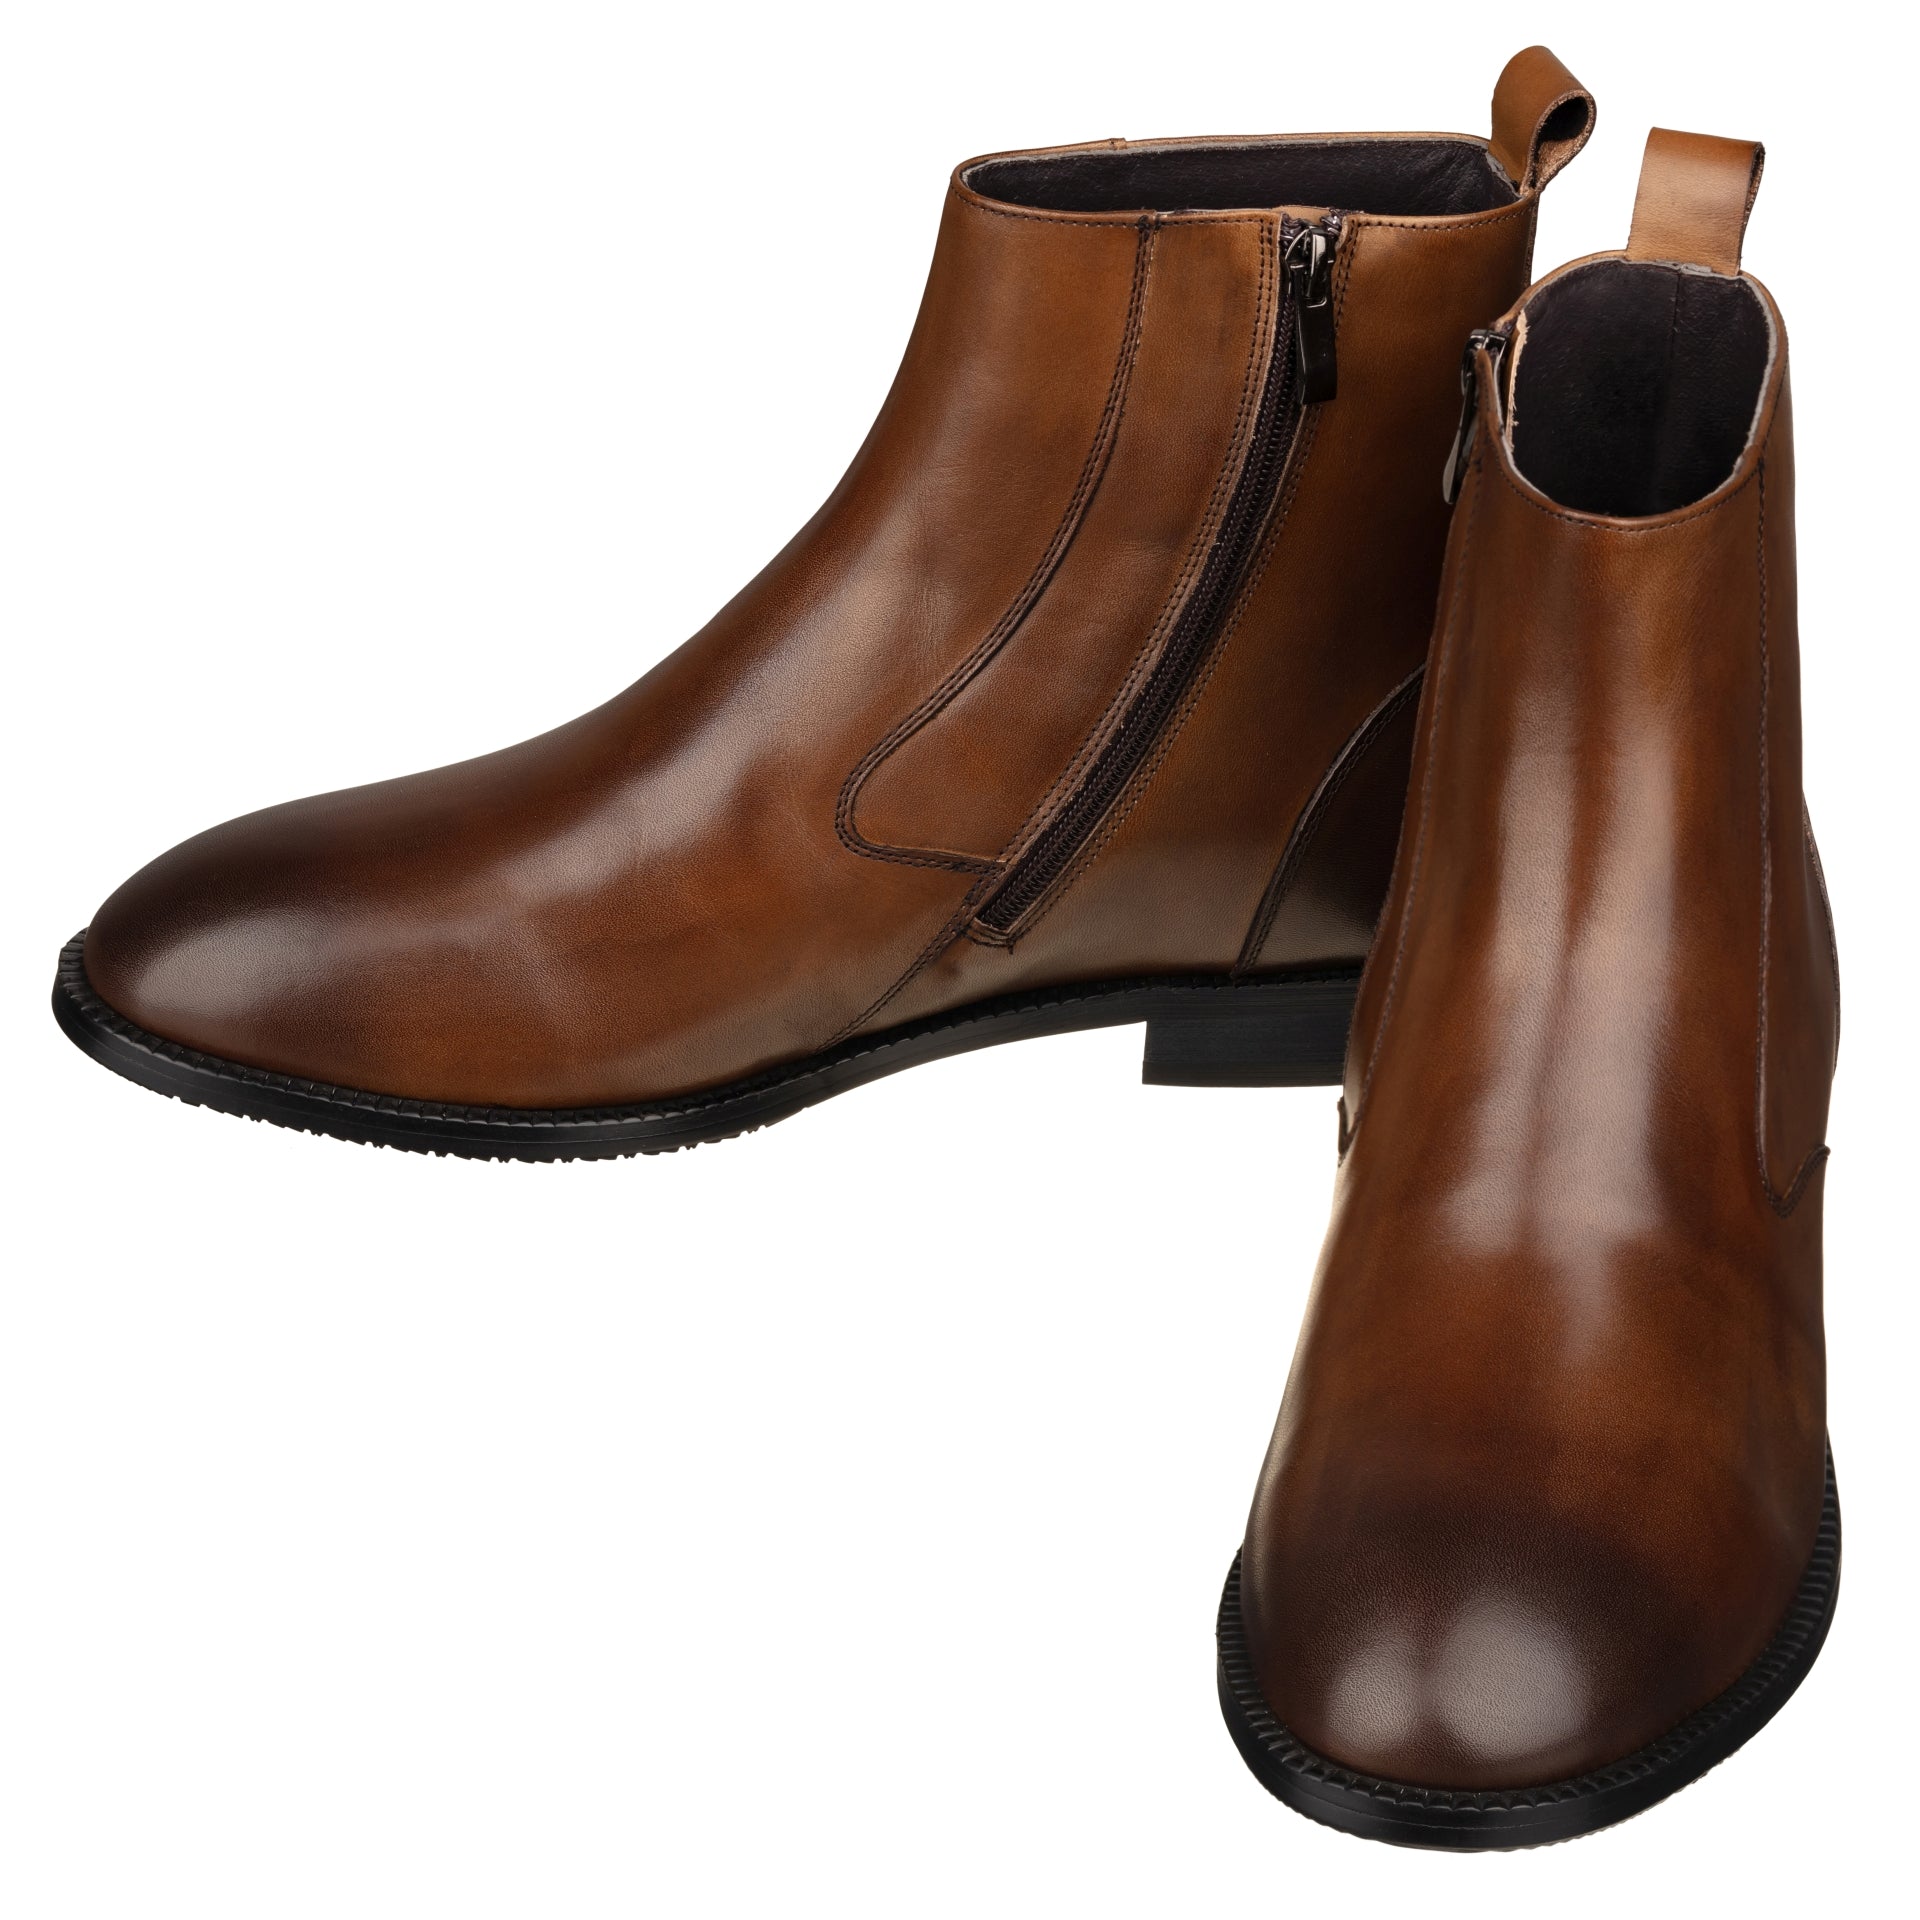 Elevator shoes height increase TOTO - K33093 - 2.6 Inches Taller (Coffee Brown) - Zipper Boot